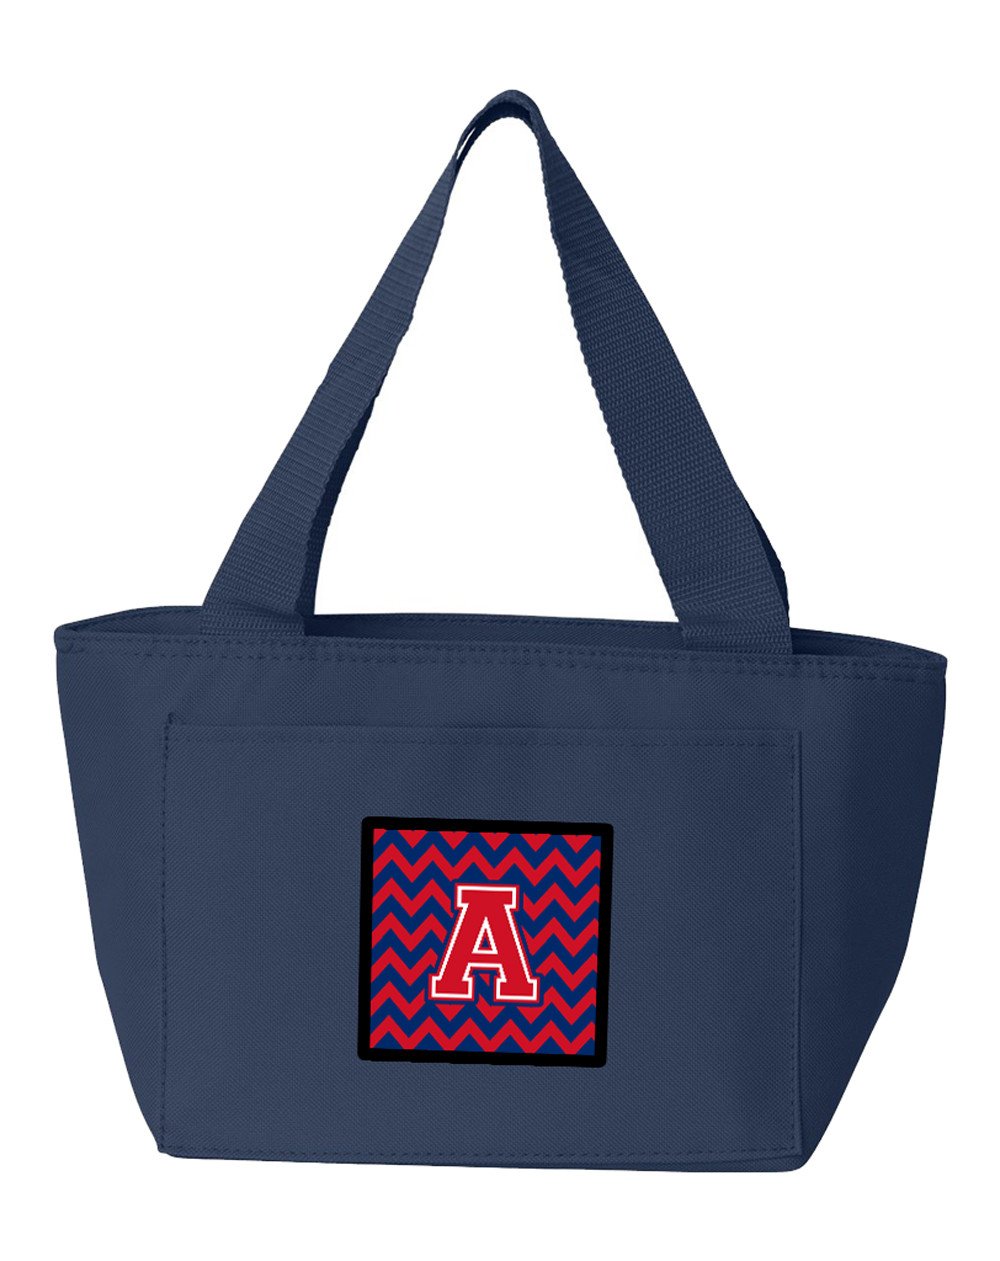 Letter A Chevron Yale Blue and Crimson Lunch Bag CJ1054-ANA-8808 by Caroline's Treasures